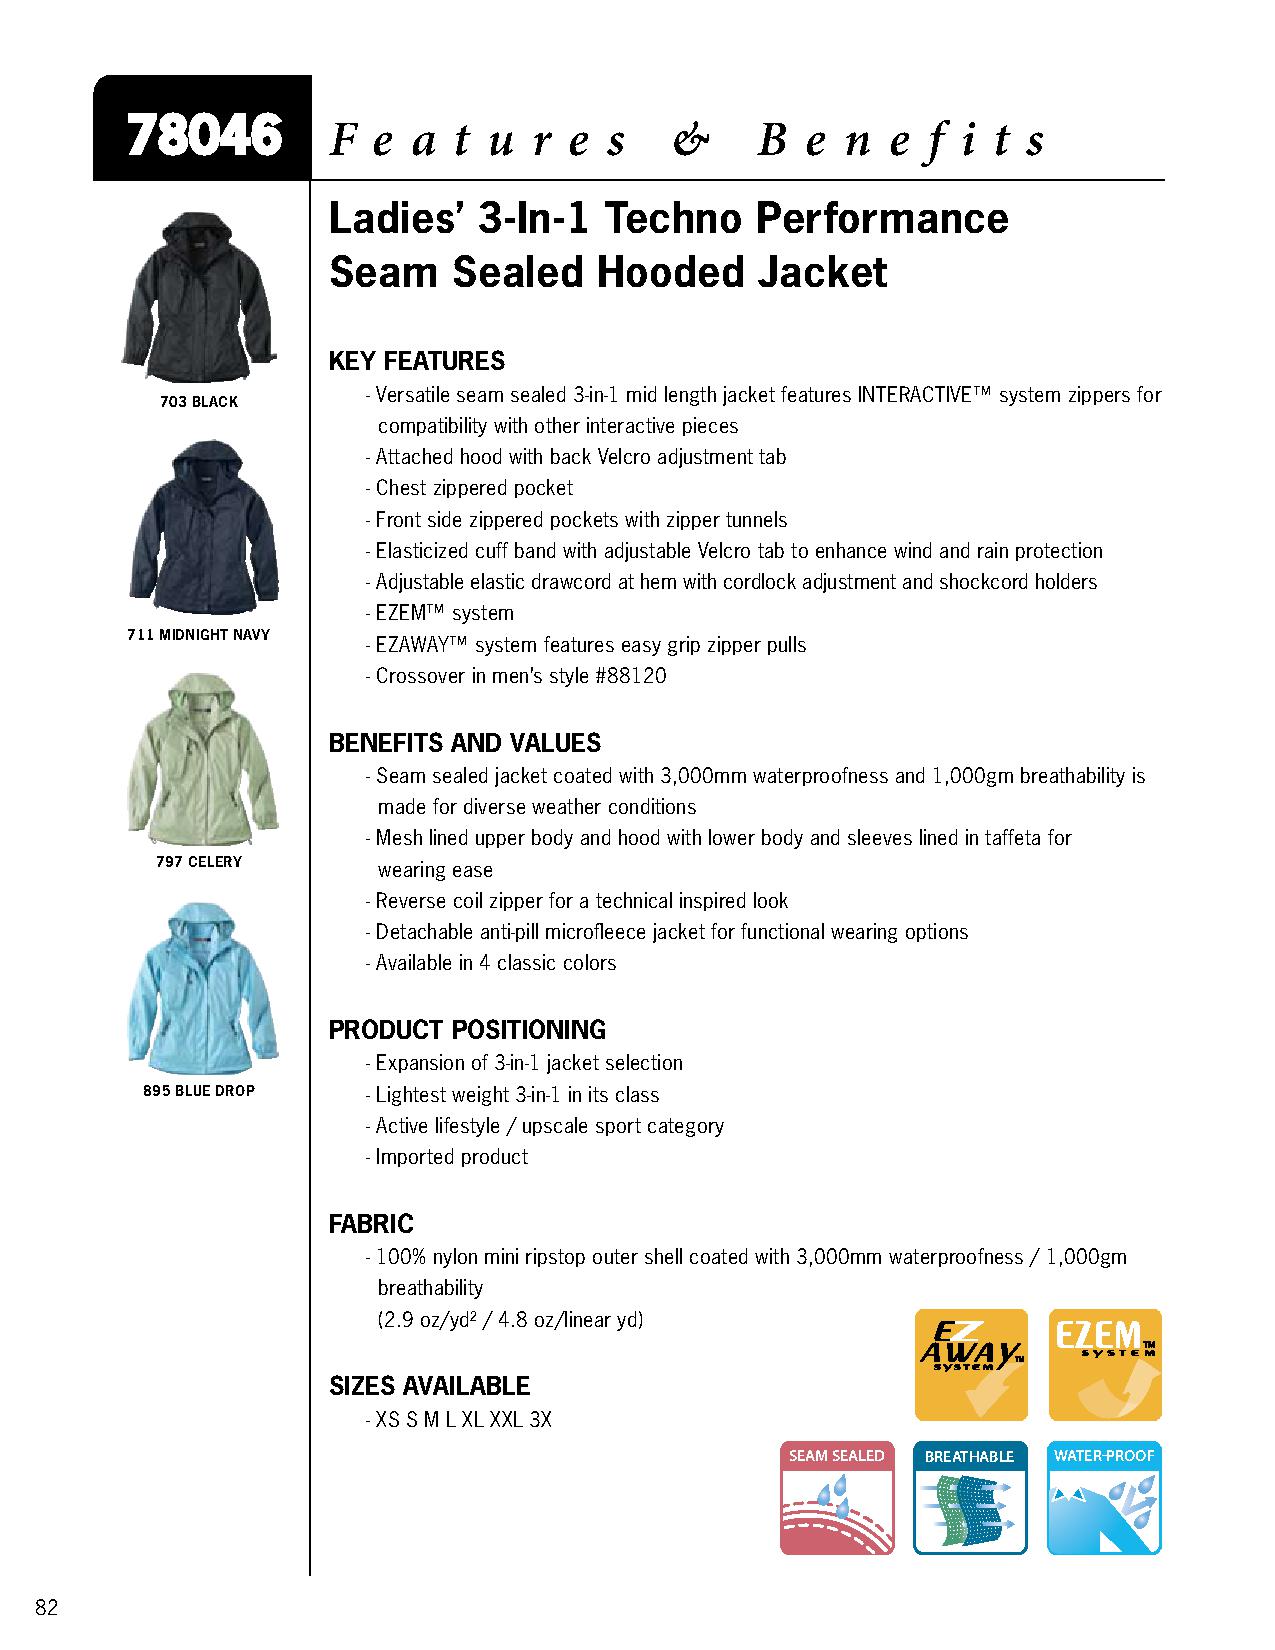 Ash City Performance Jackets 78046 - Ladies' 3-In-1 Techno Performance Seam-Sealed Hooded Jacket